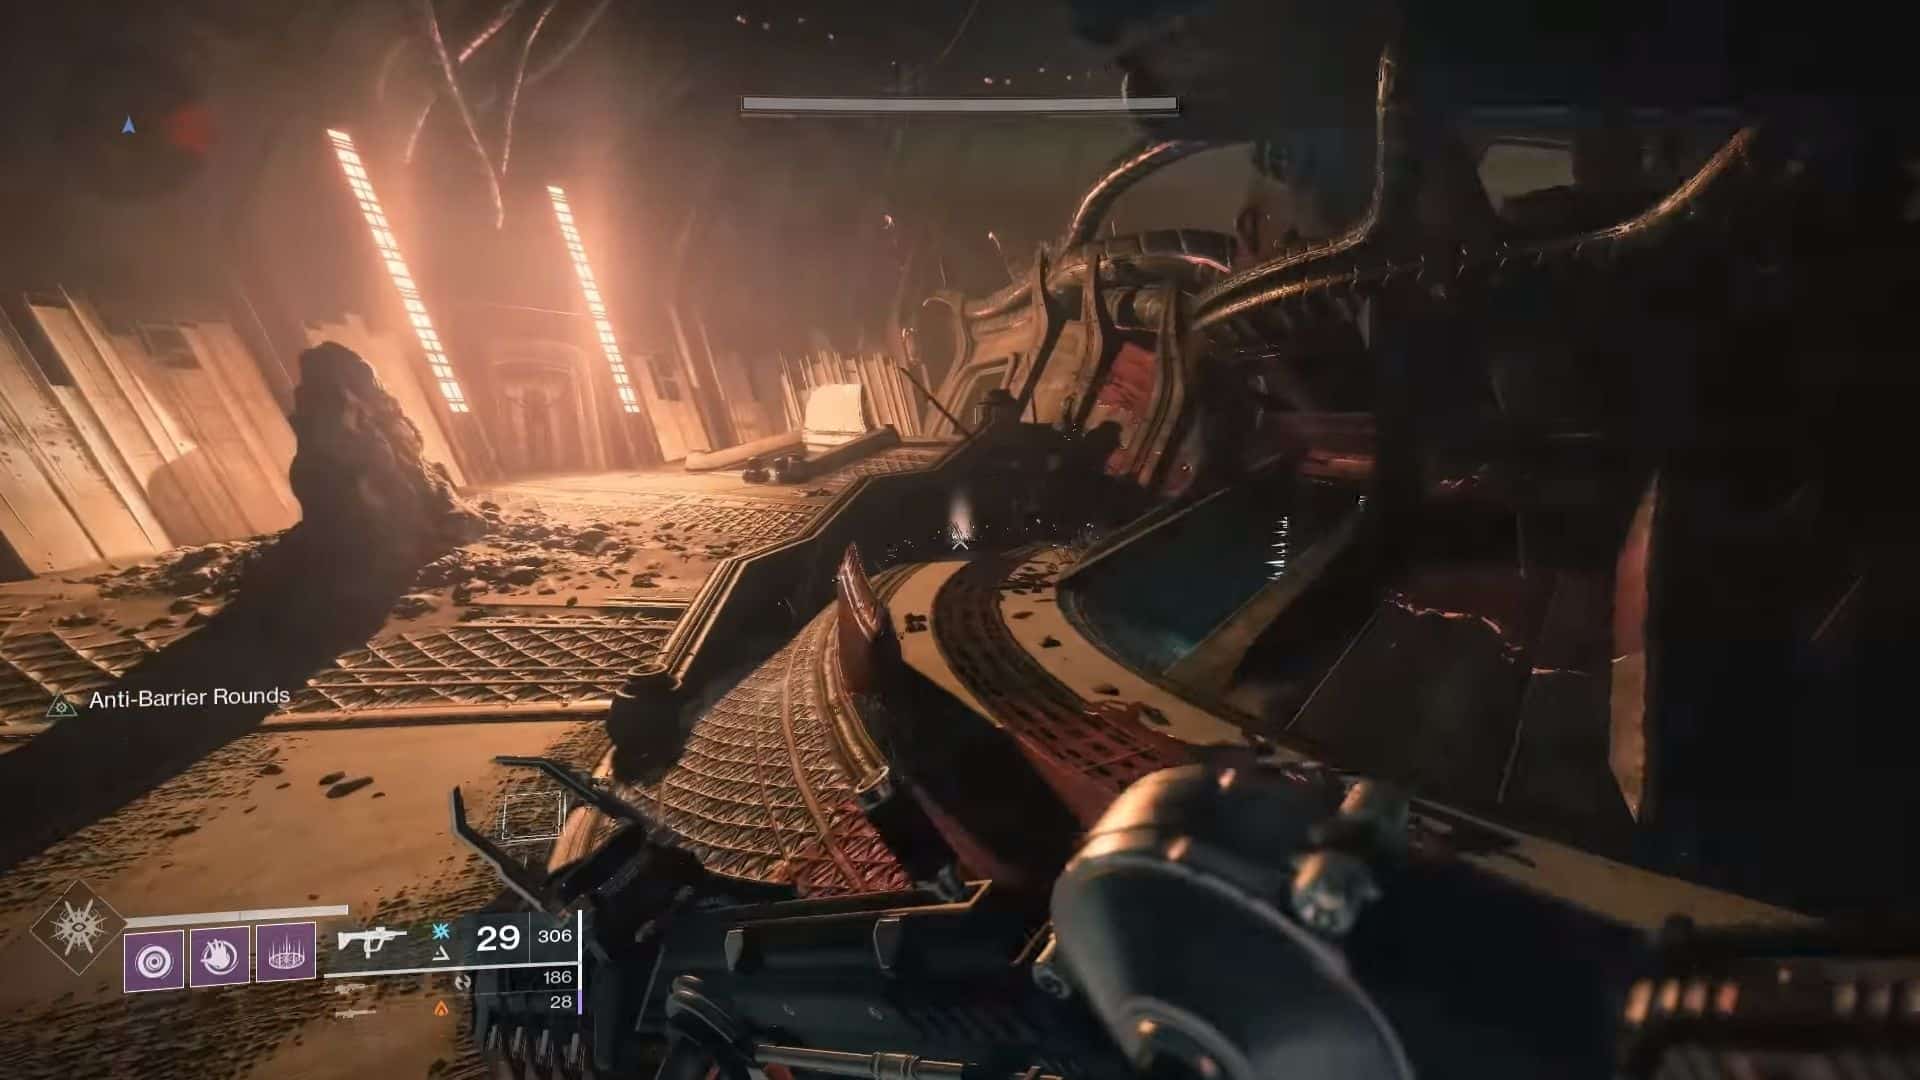 Hawkmoon Paracausal feather location in Shrine of Oryx